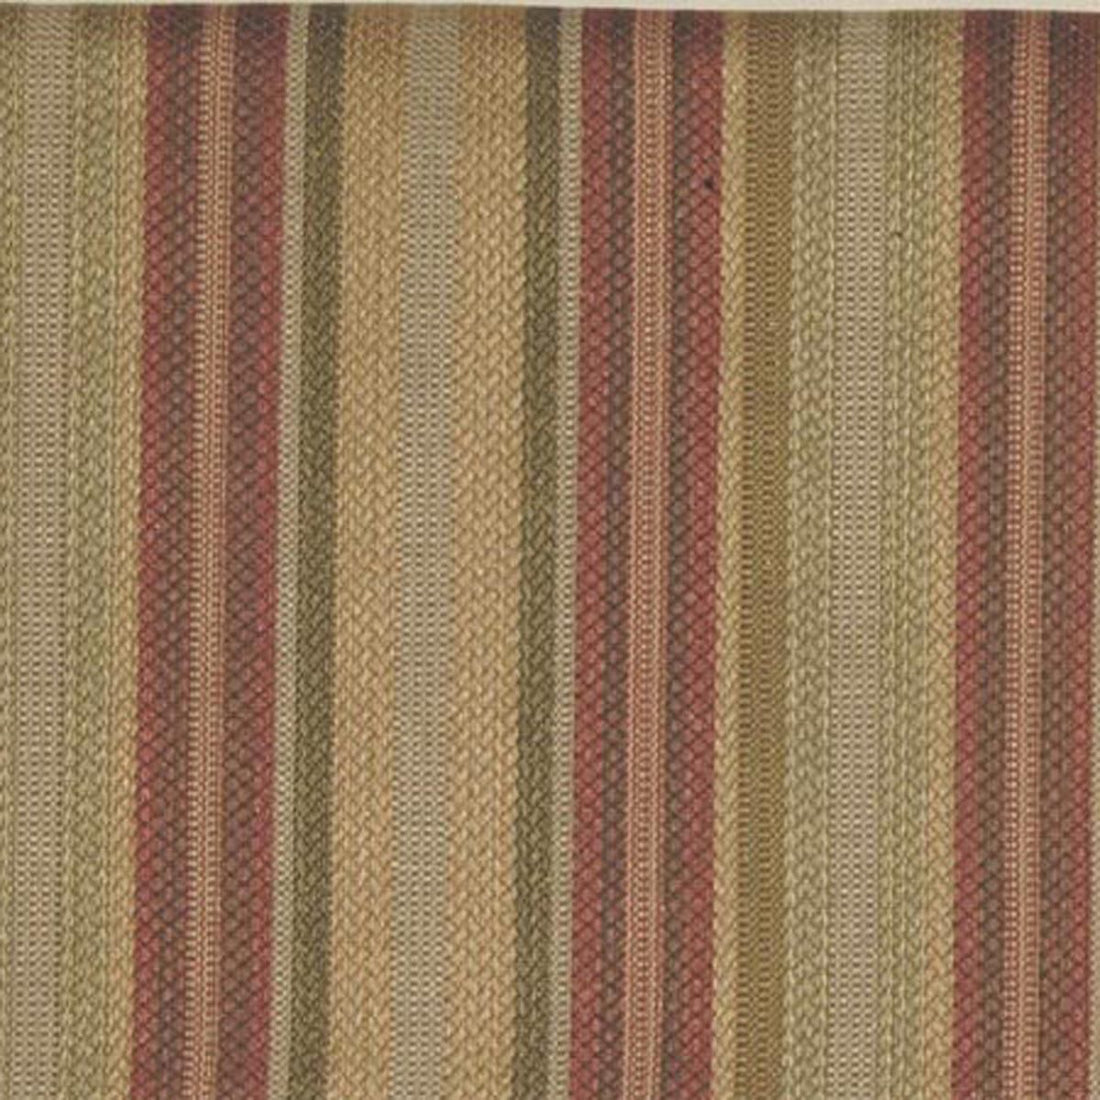 Gianna Stripe fabric in parchment color - pattern number VM 00014562 - by Scalamandre in the Old World Weavers collection